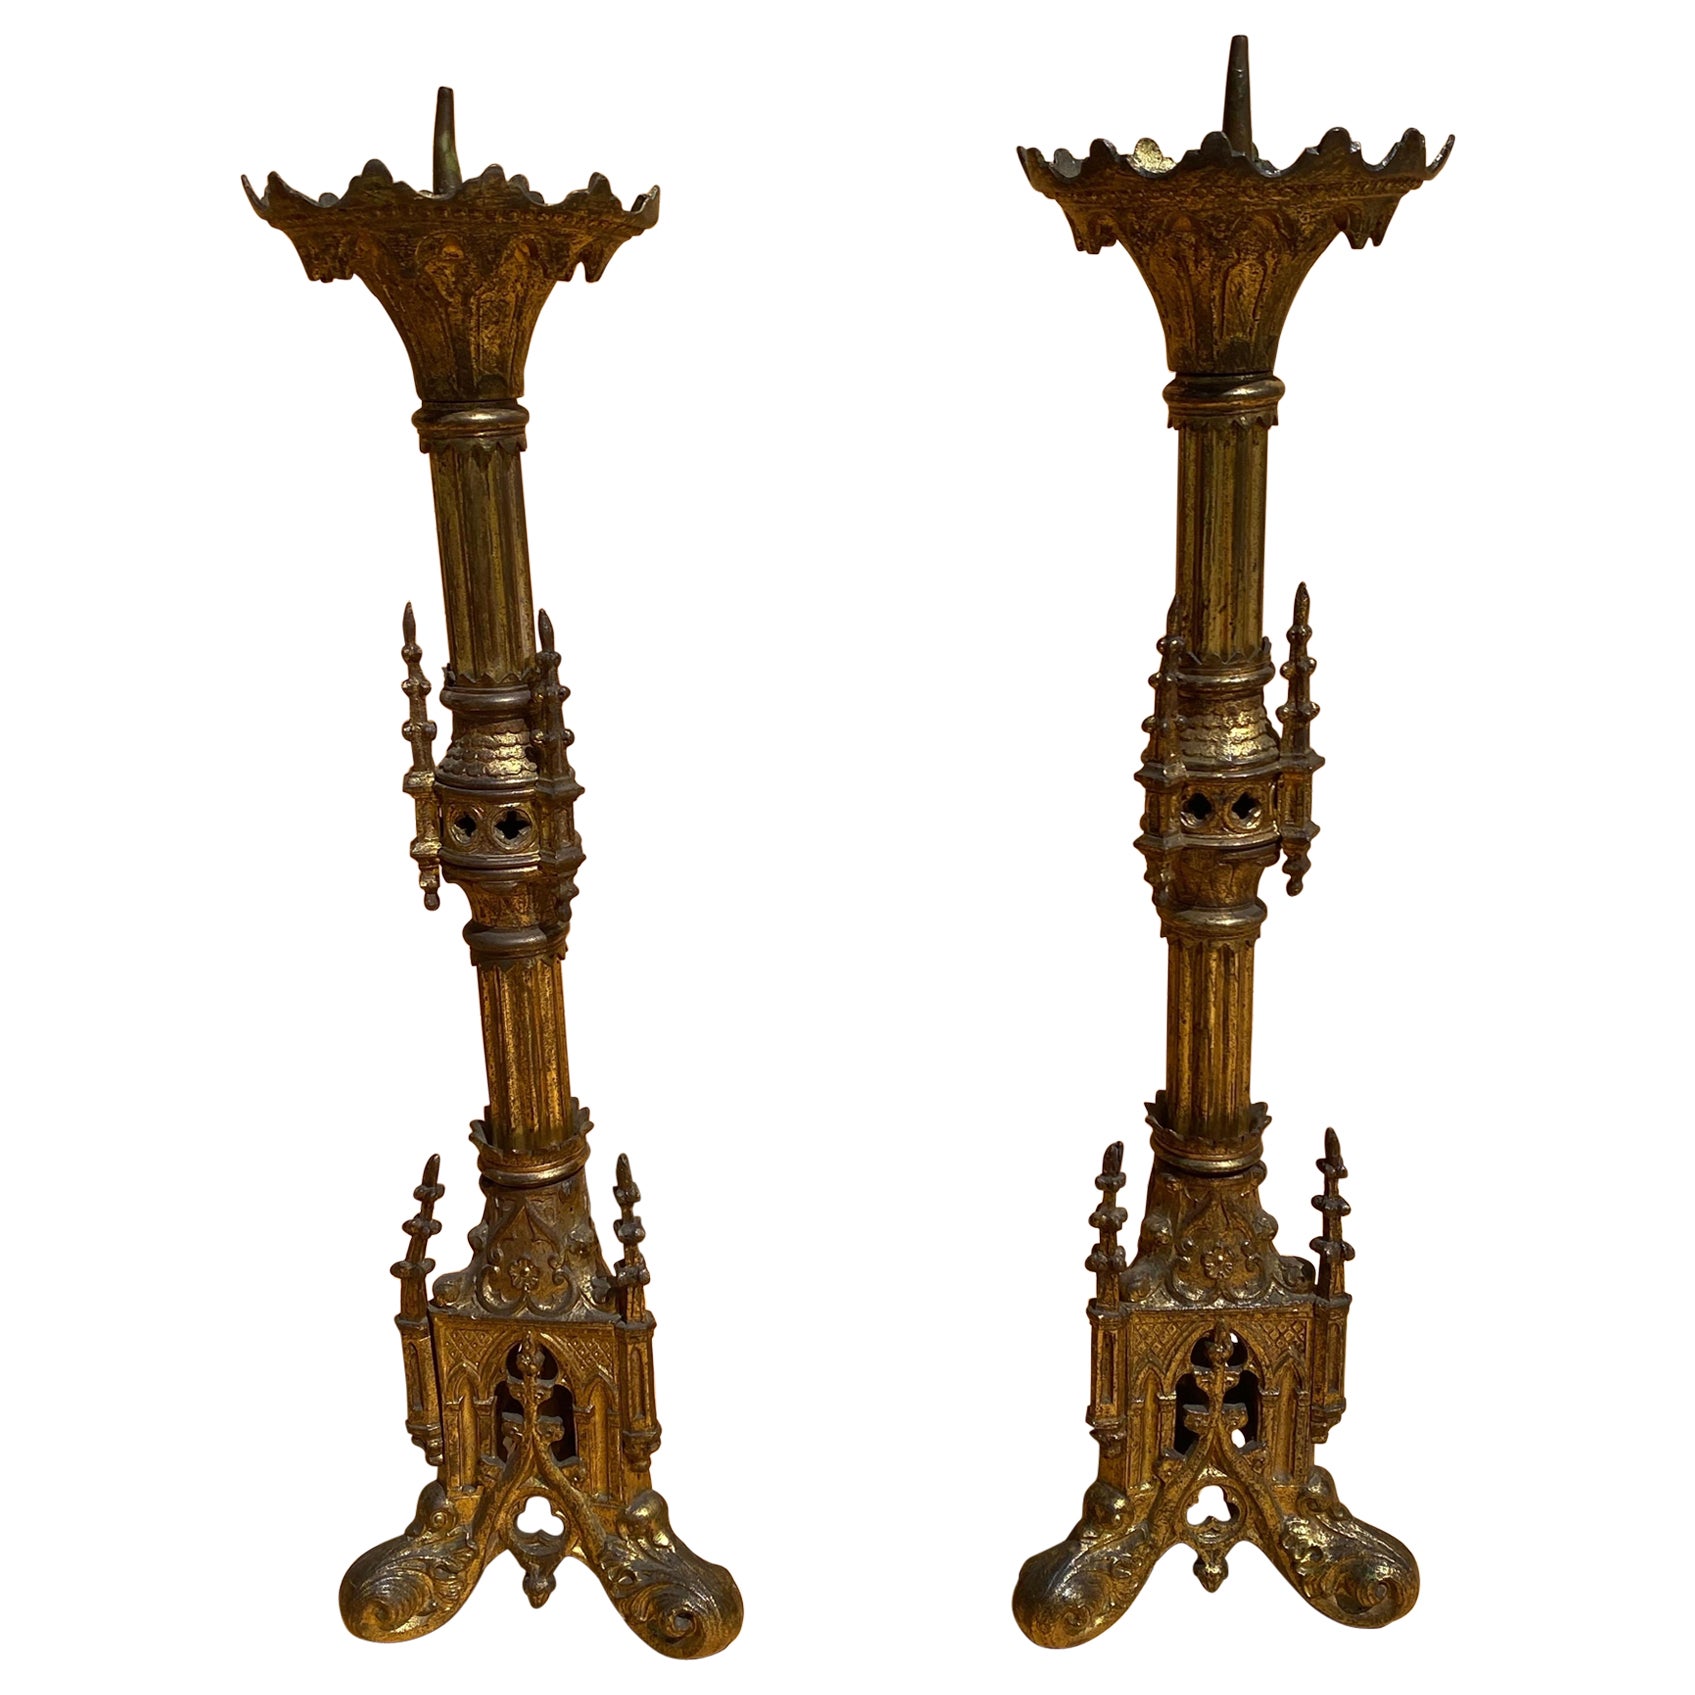 Antique French Neogothic Altar Torchère Candlestick Set w/ Architectural Element For Sale